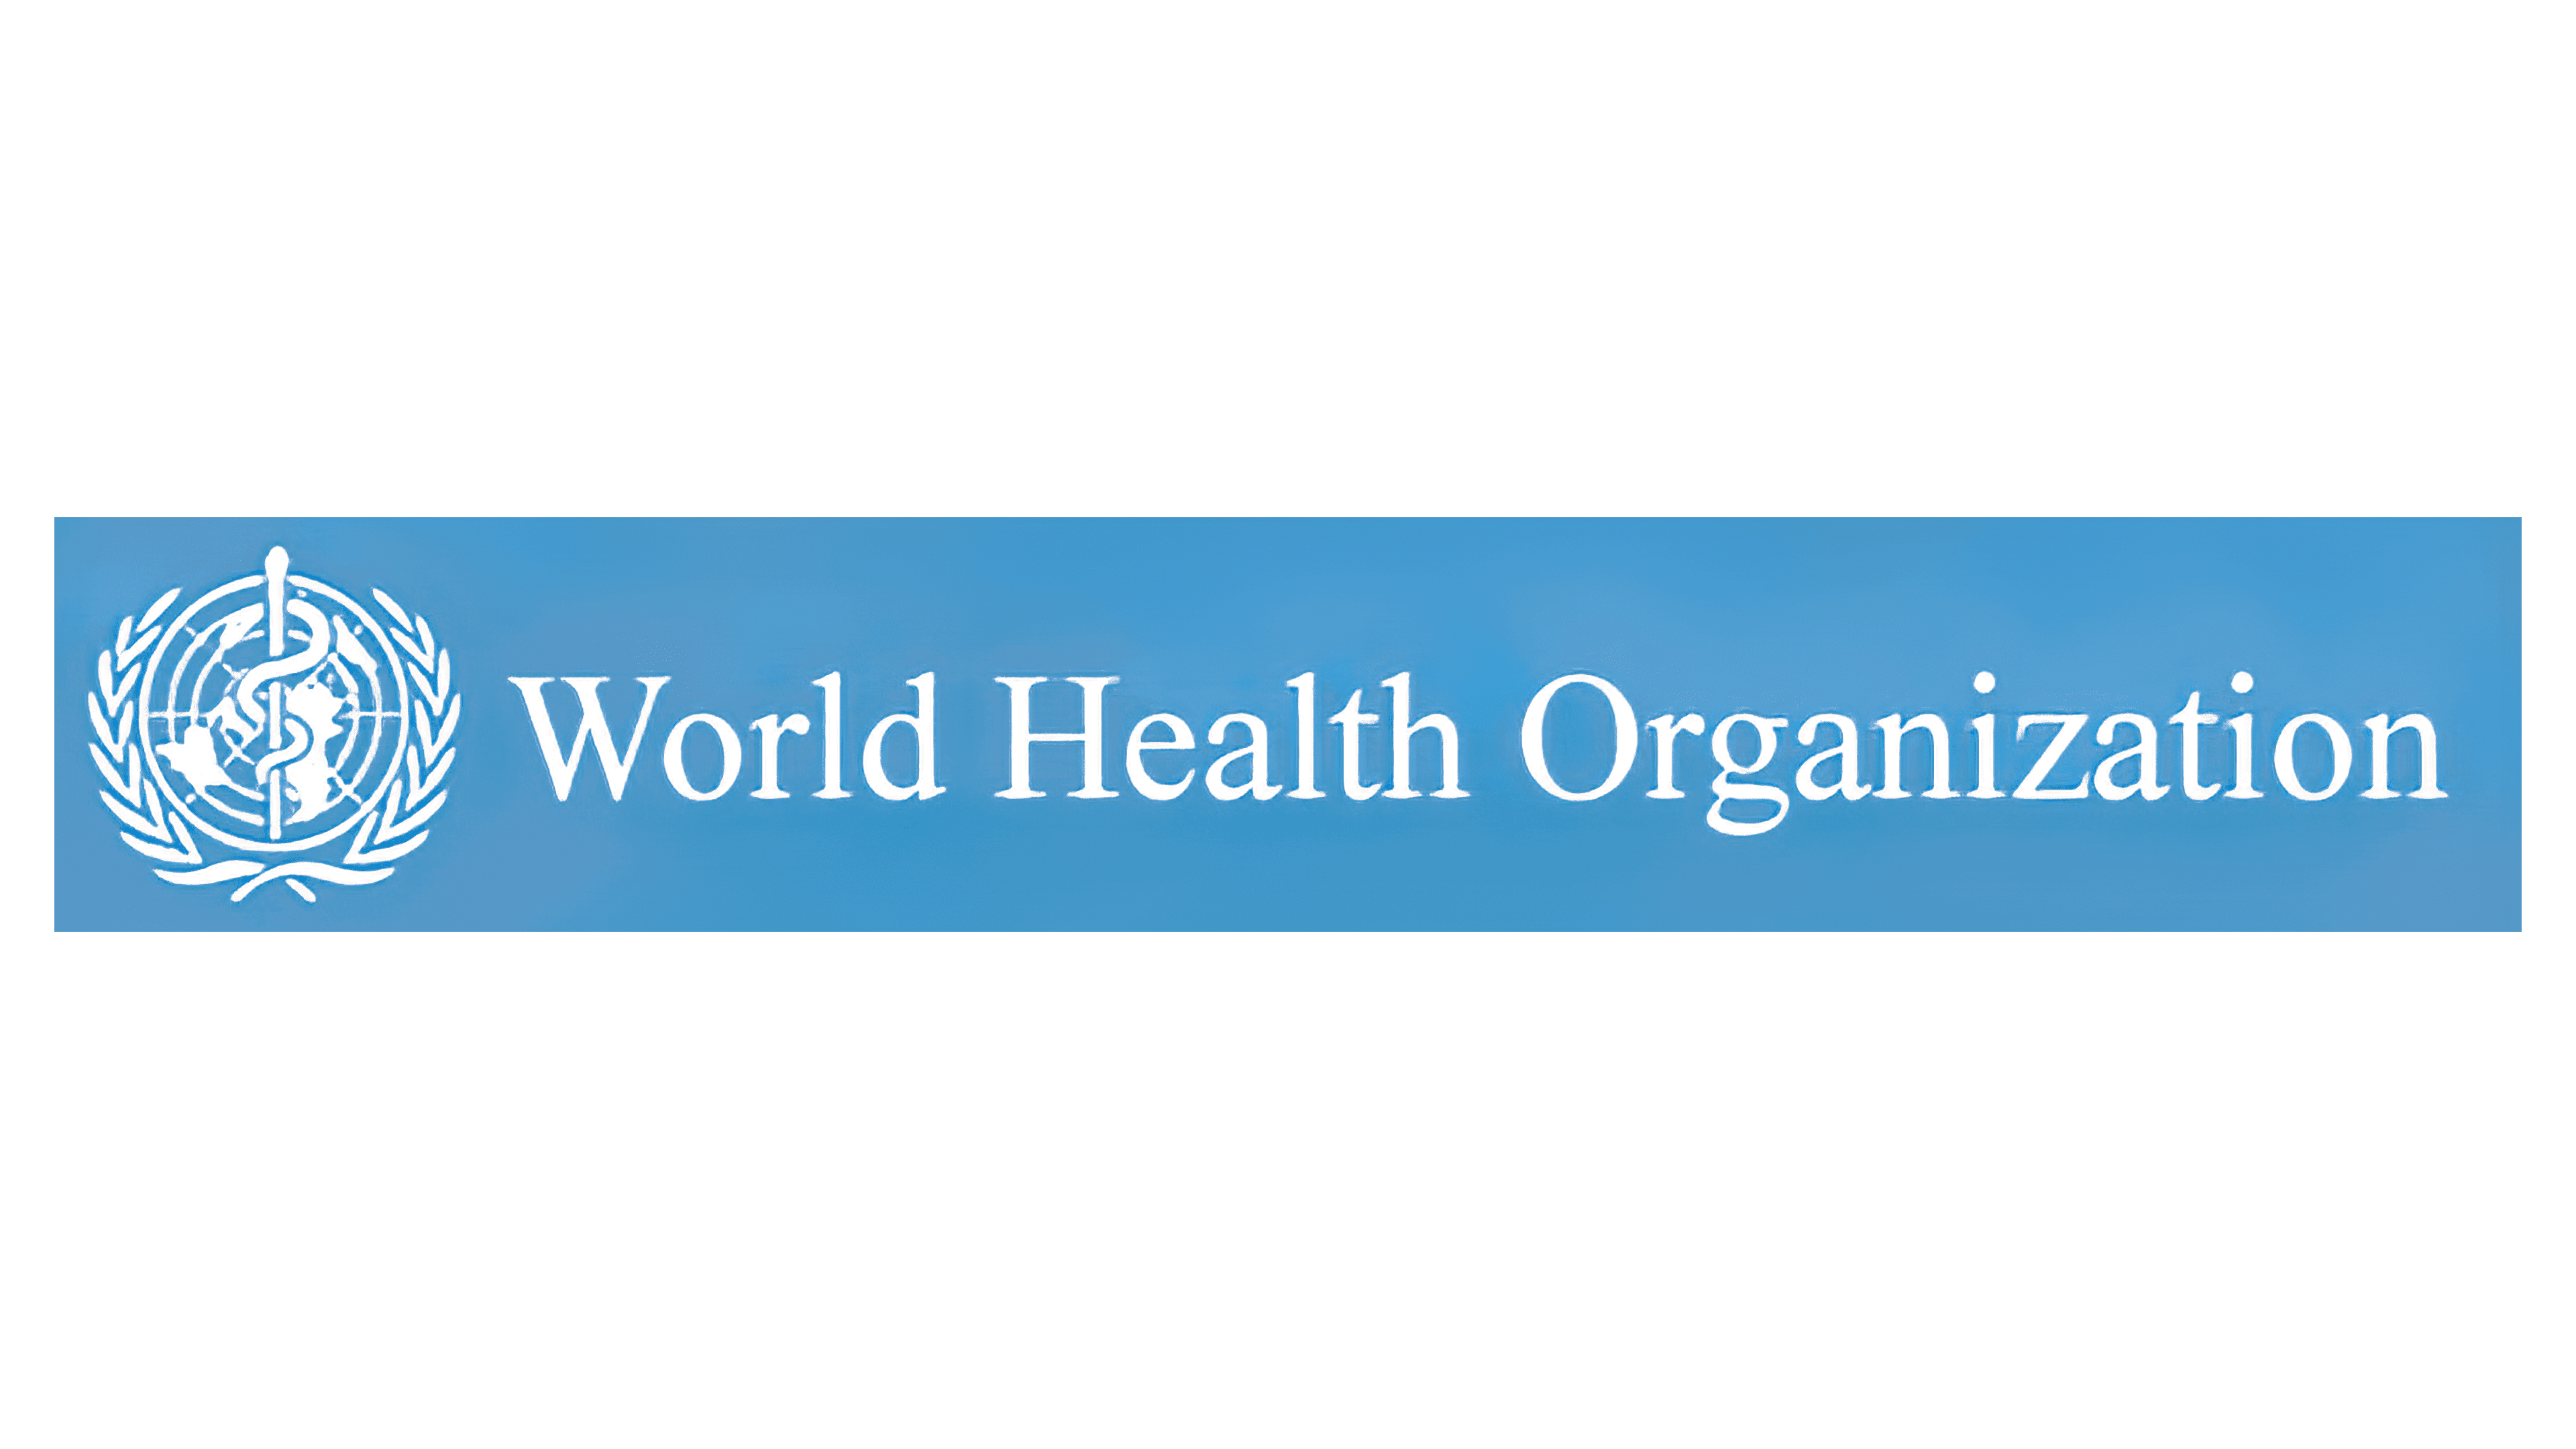 World Health Organization Logo, meaning, history, PNG, SVG, vector